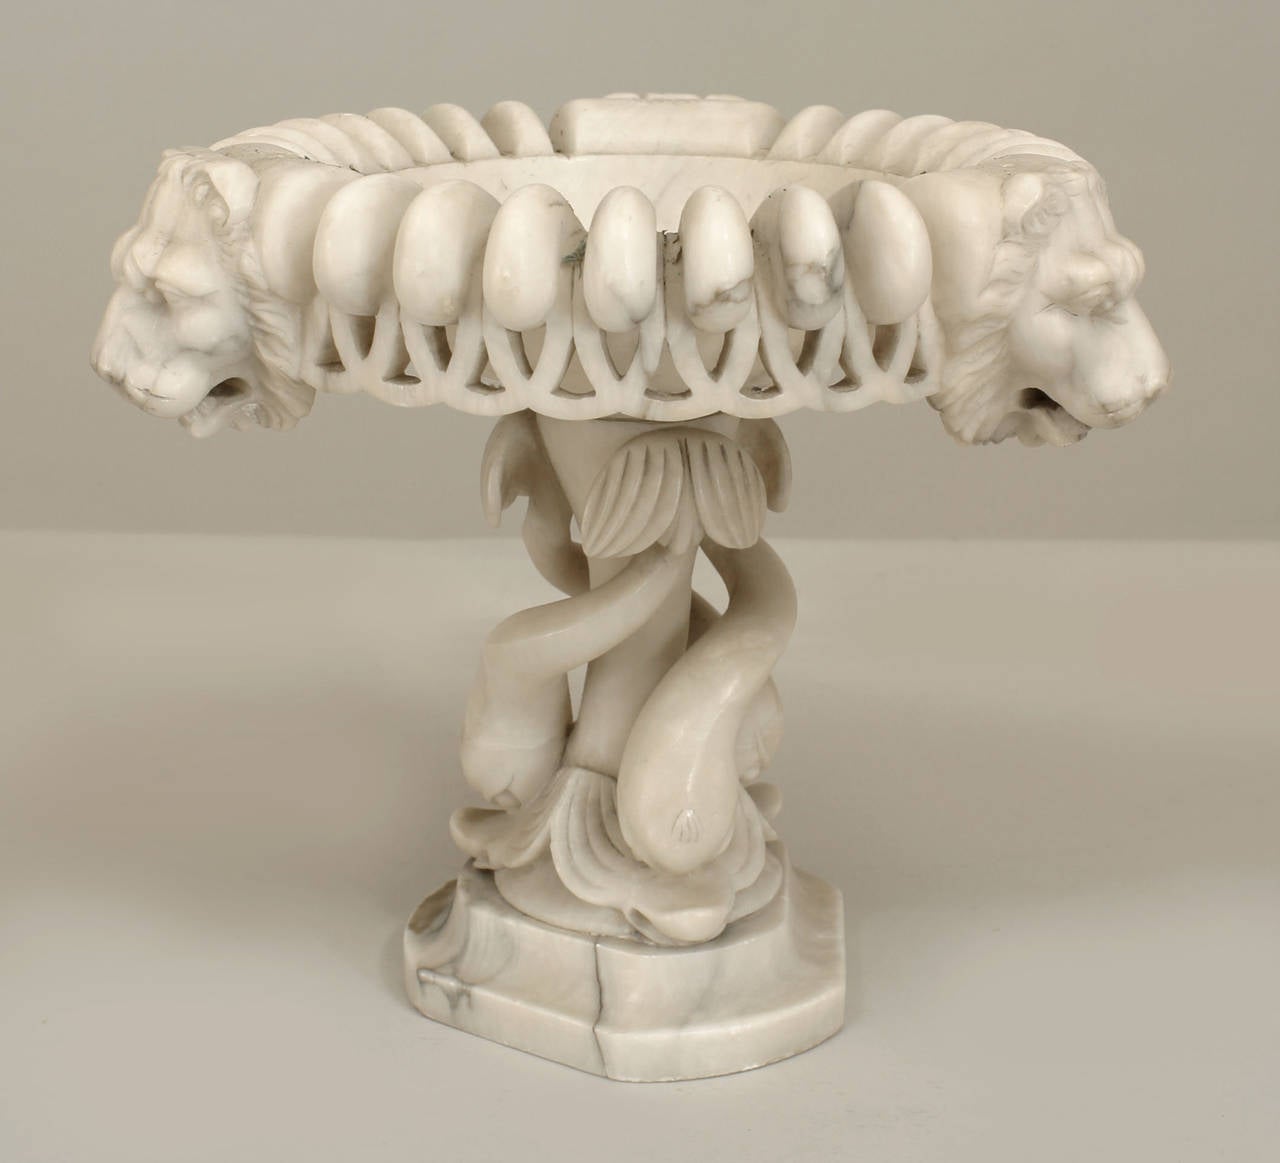 Italian Neo-classic style (19th Cent) white marble tazza form urn with a triangular base of 3 intertwined dolphins supporting a round bowl with 3 lion heads & filigree border.
